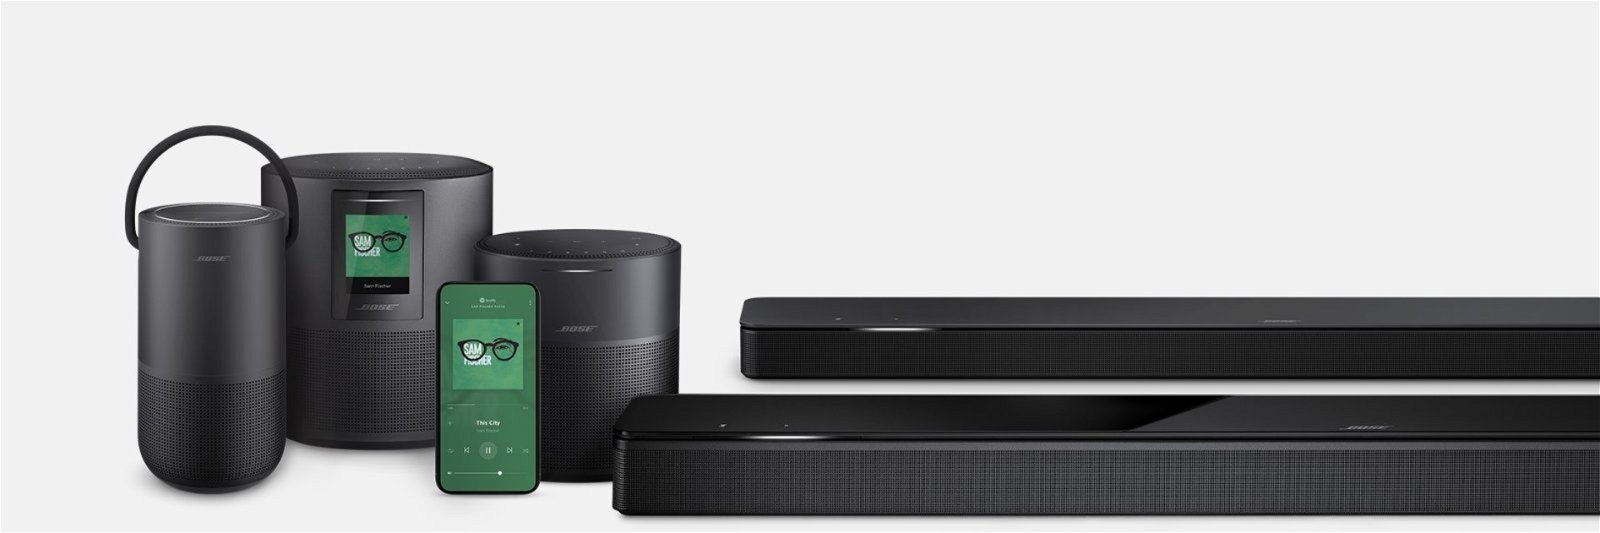 Smart products from Bose